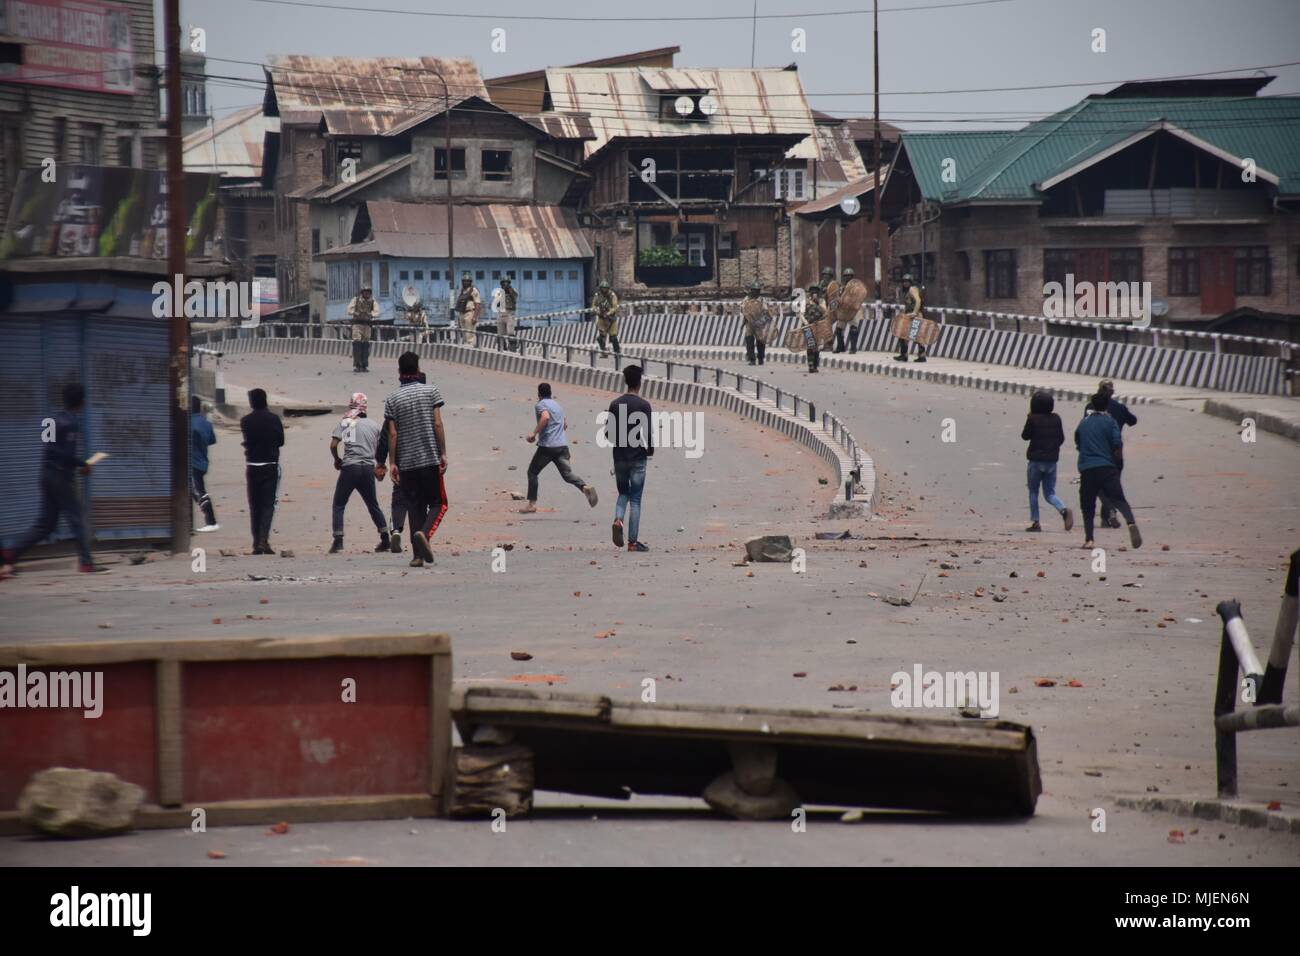 May 5, 2018 - Srinagar, Jammu & Kashmir, India - People clashes with forces near the Encounter site in Srinagar.4 Killed and several injured in an encounter between Indian forces and militants at chatabal area of Srinagar summer capital of Indian Kashmir on Saturday. Three militants were killed during a brief shootout after government forces laid seige around densely populated chatabal area of Srinagar. A young man also died after he was hit by the armoured vehicle during the clashes between the residents and police force as residents tried to help the Militants in escape. (Credit Image: © Ab Stock Photo